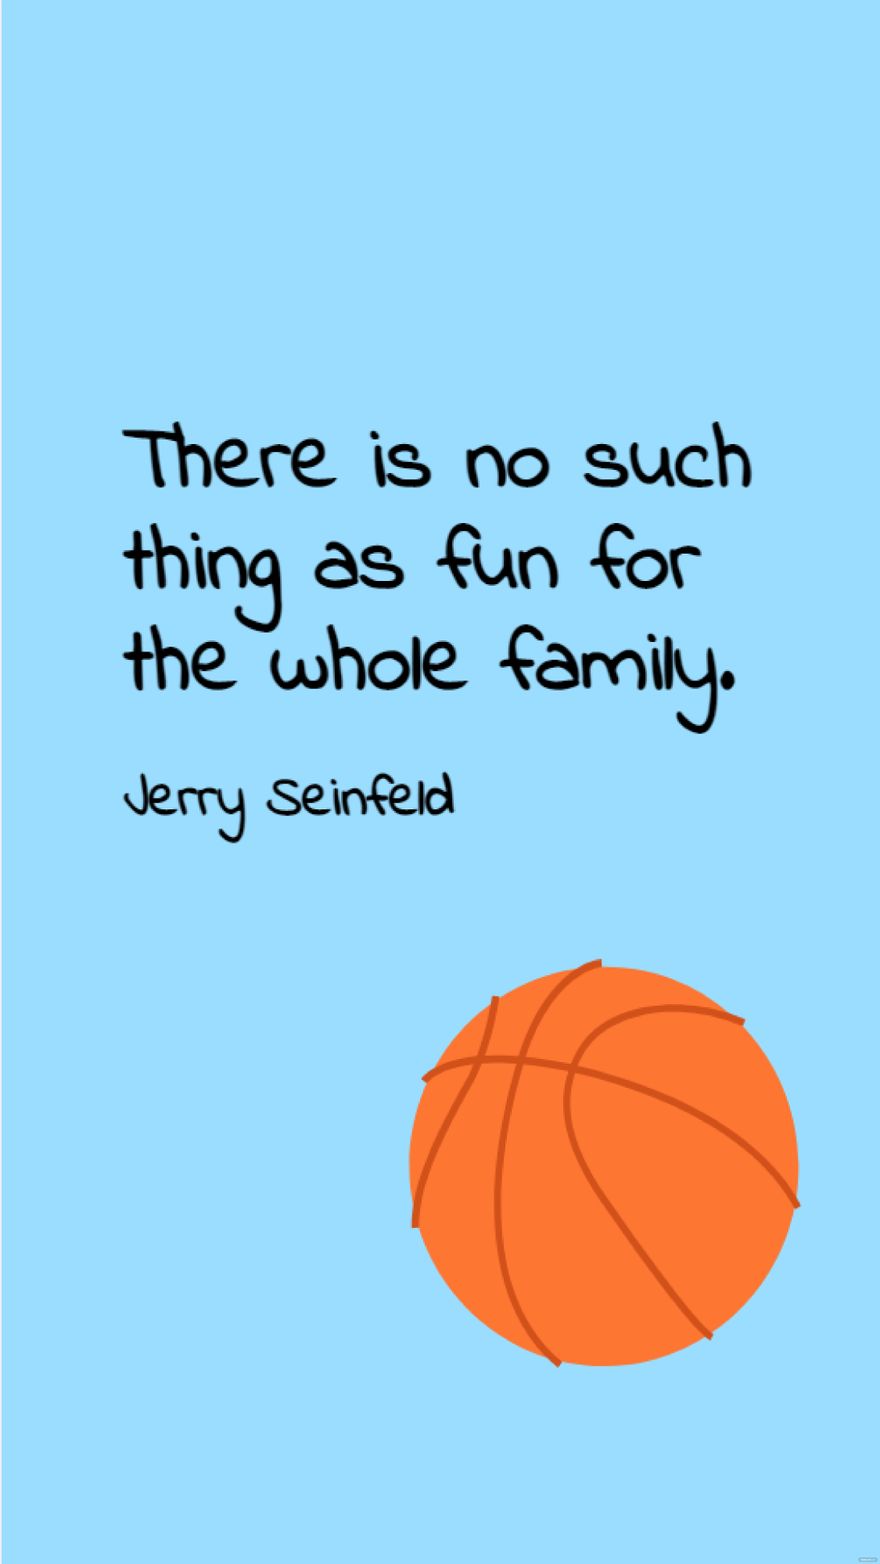 Jerry Seinfeld - There is no such thing as fun for the whole family. in JPG